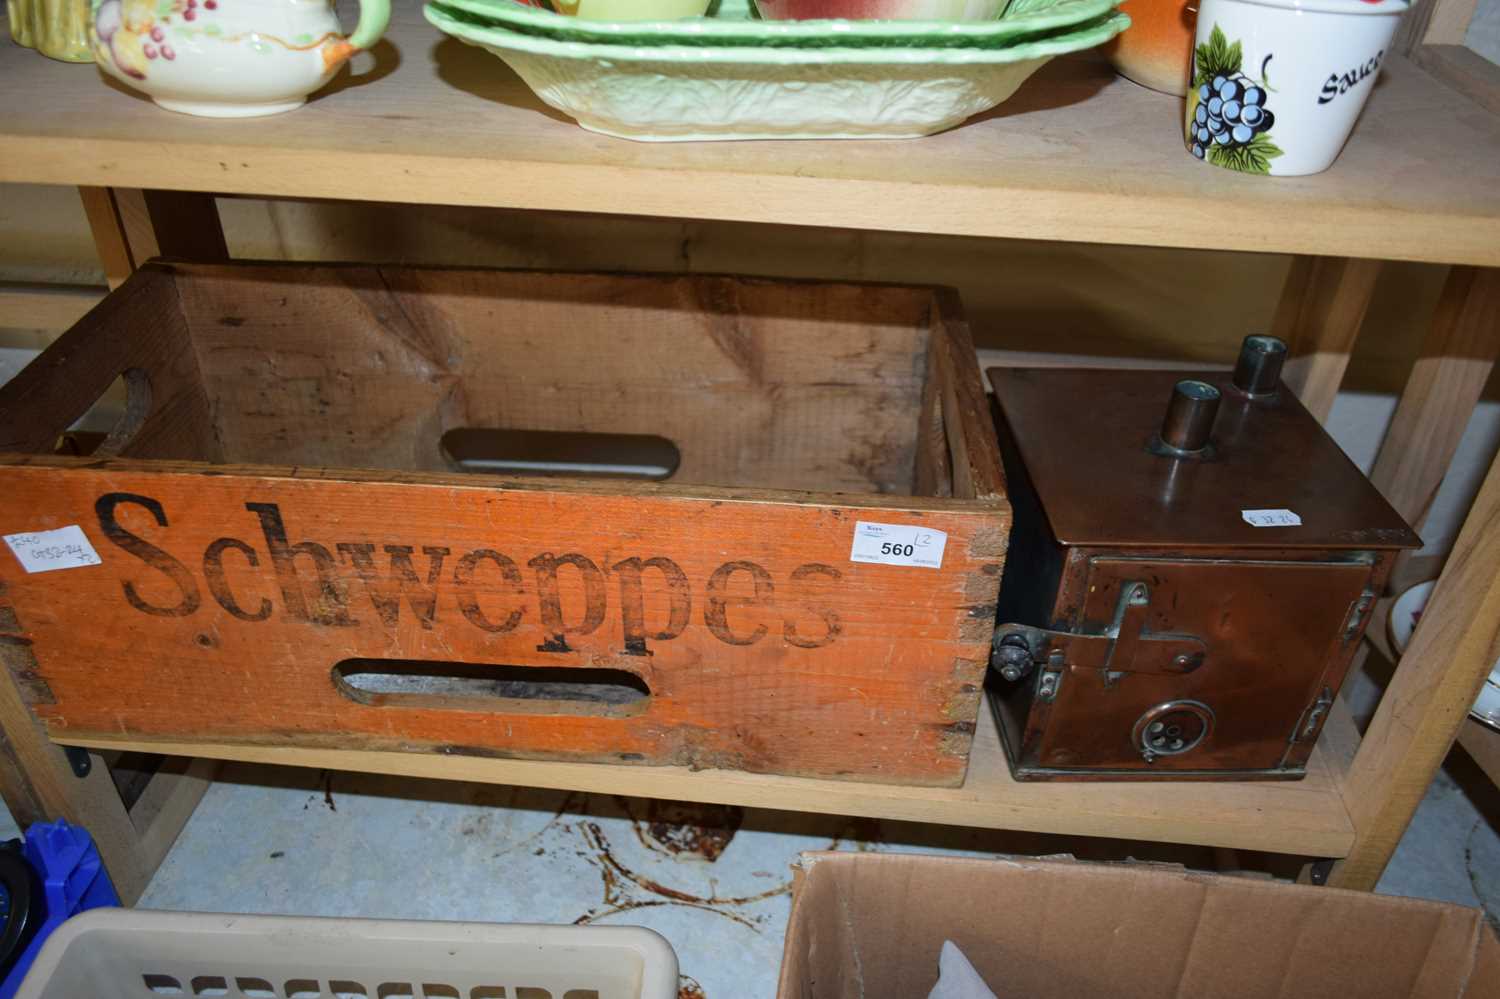 SMALL COPPER OVEN OR STERILISER OF SQUARE FORM, TOGETHER WITH A SCHWEPPES WOODEN BOTTLE CRATE